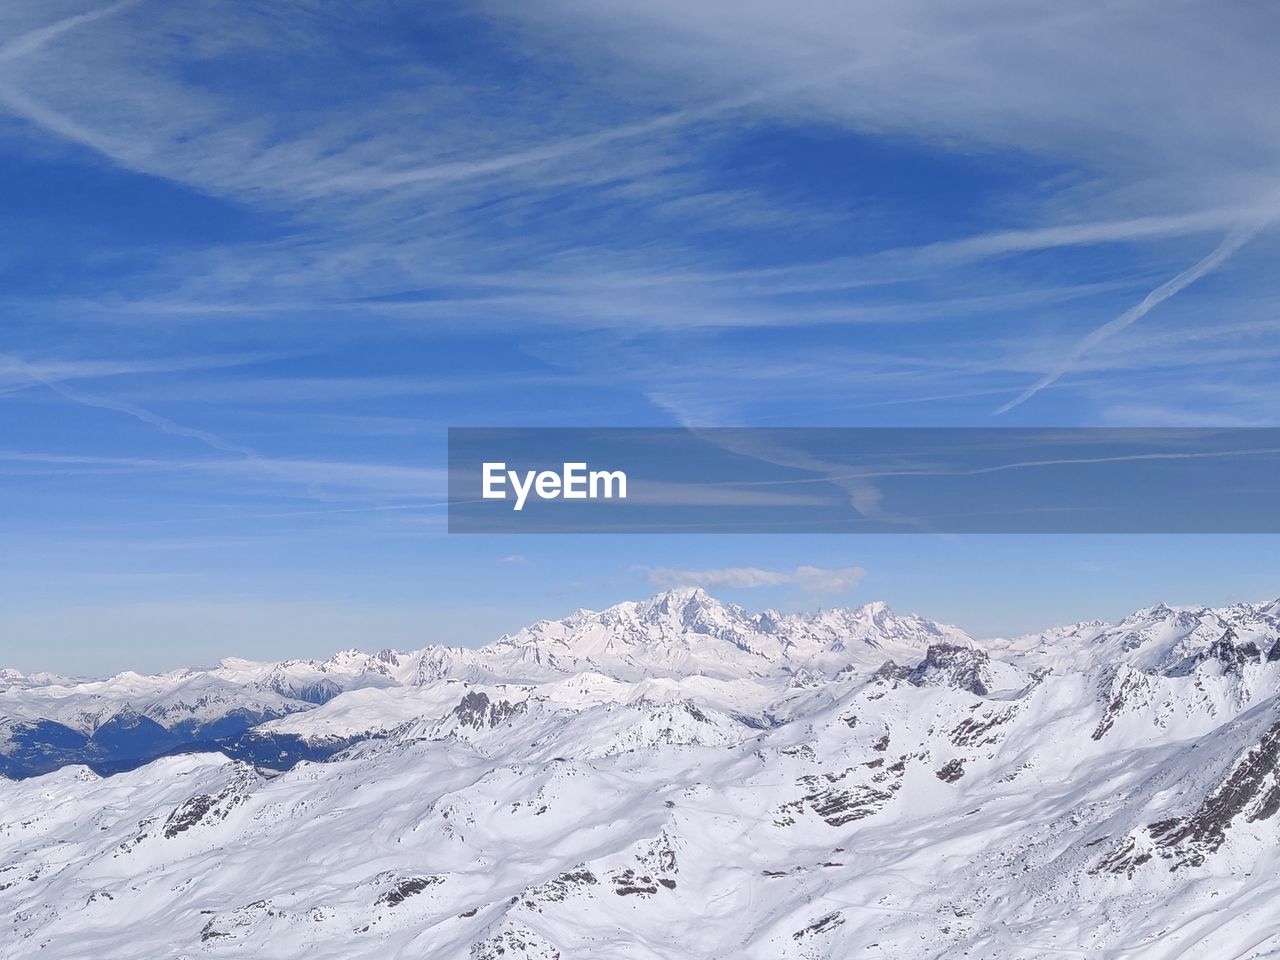 SNOW COVERED MOUNTAINS AGAINST BLUE SKY